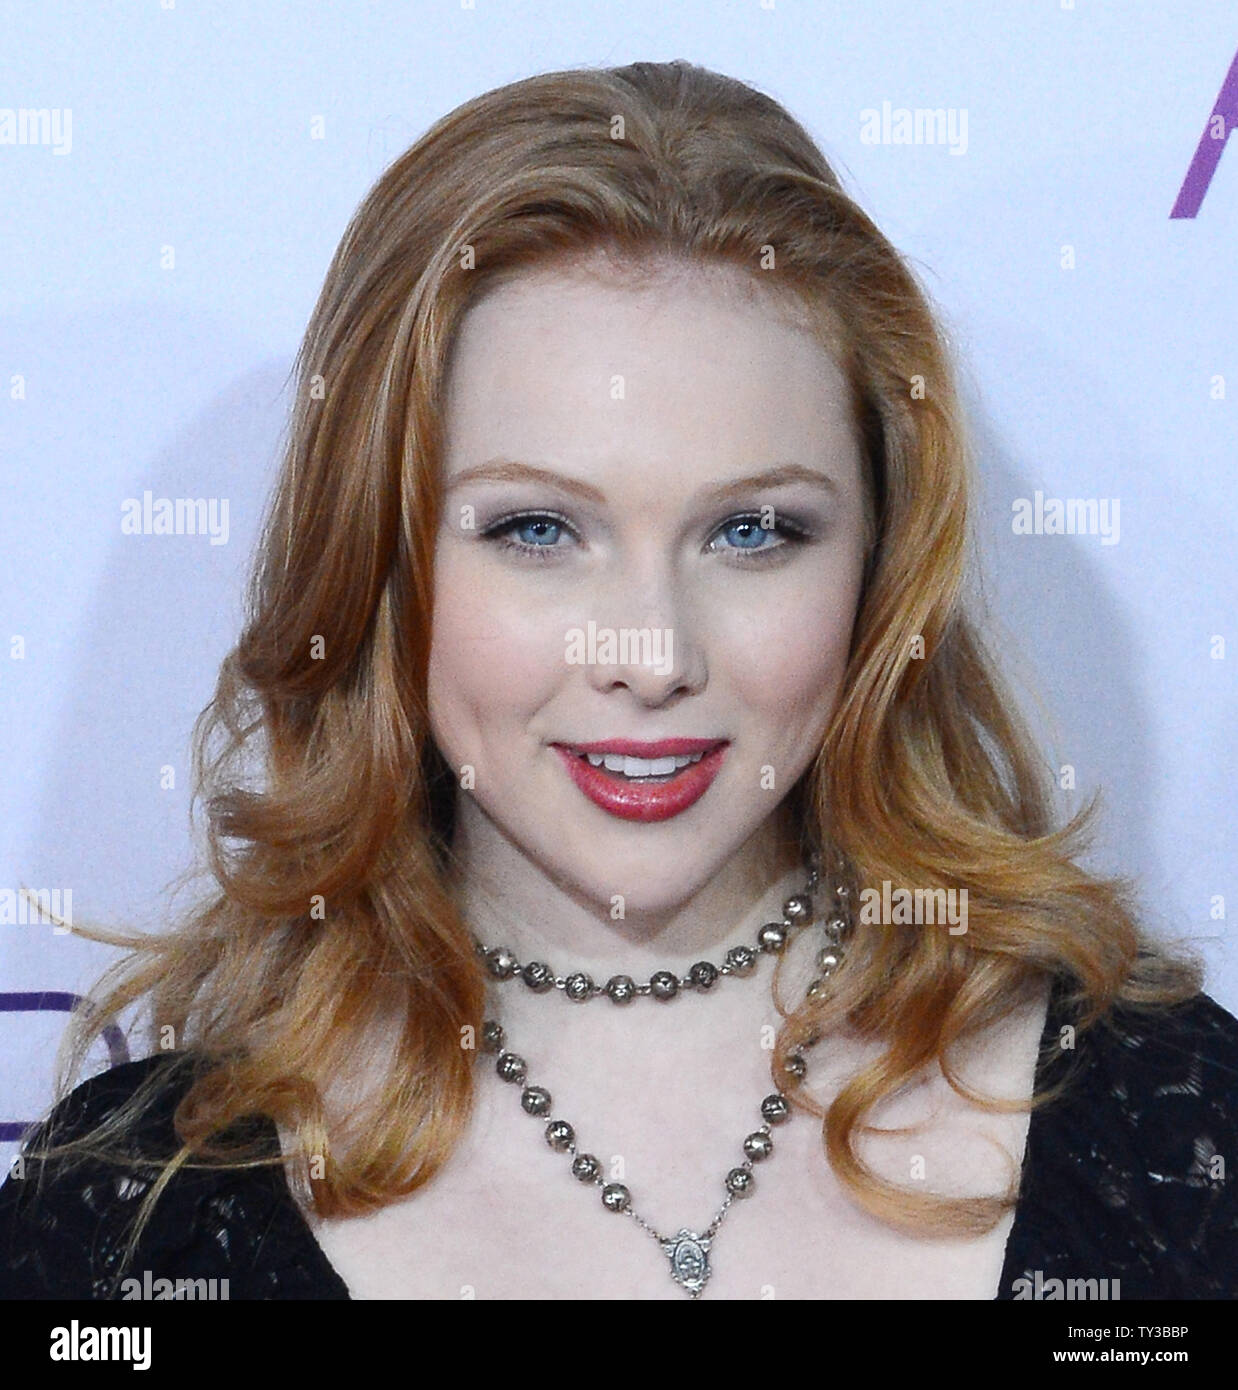 Actress Molly C. Quinn attends the People's Choice Awards 2013 at Nokia Theatre L.A. Live in Los Angeles on January 9, 2013.  UPI/Jim Ruymen Stock Photo